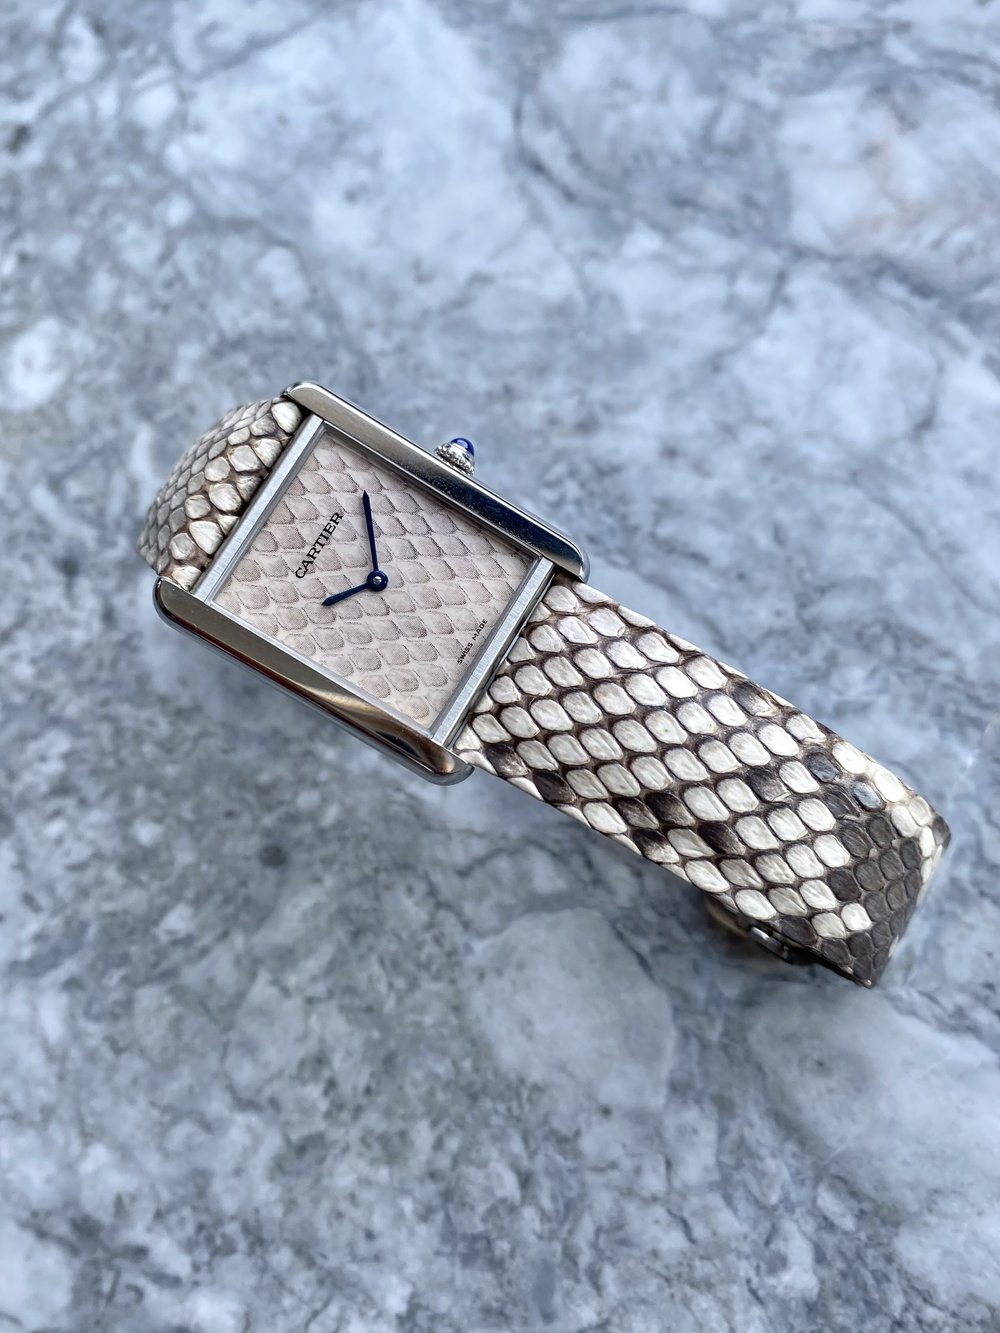 Cartier Tank Solo 3169 - Python Dial. — Danny's Vintage Watches